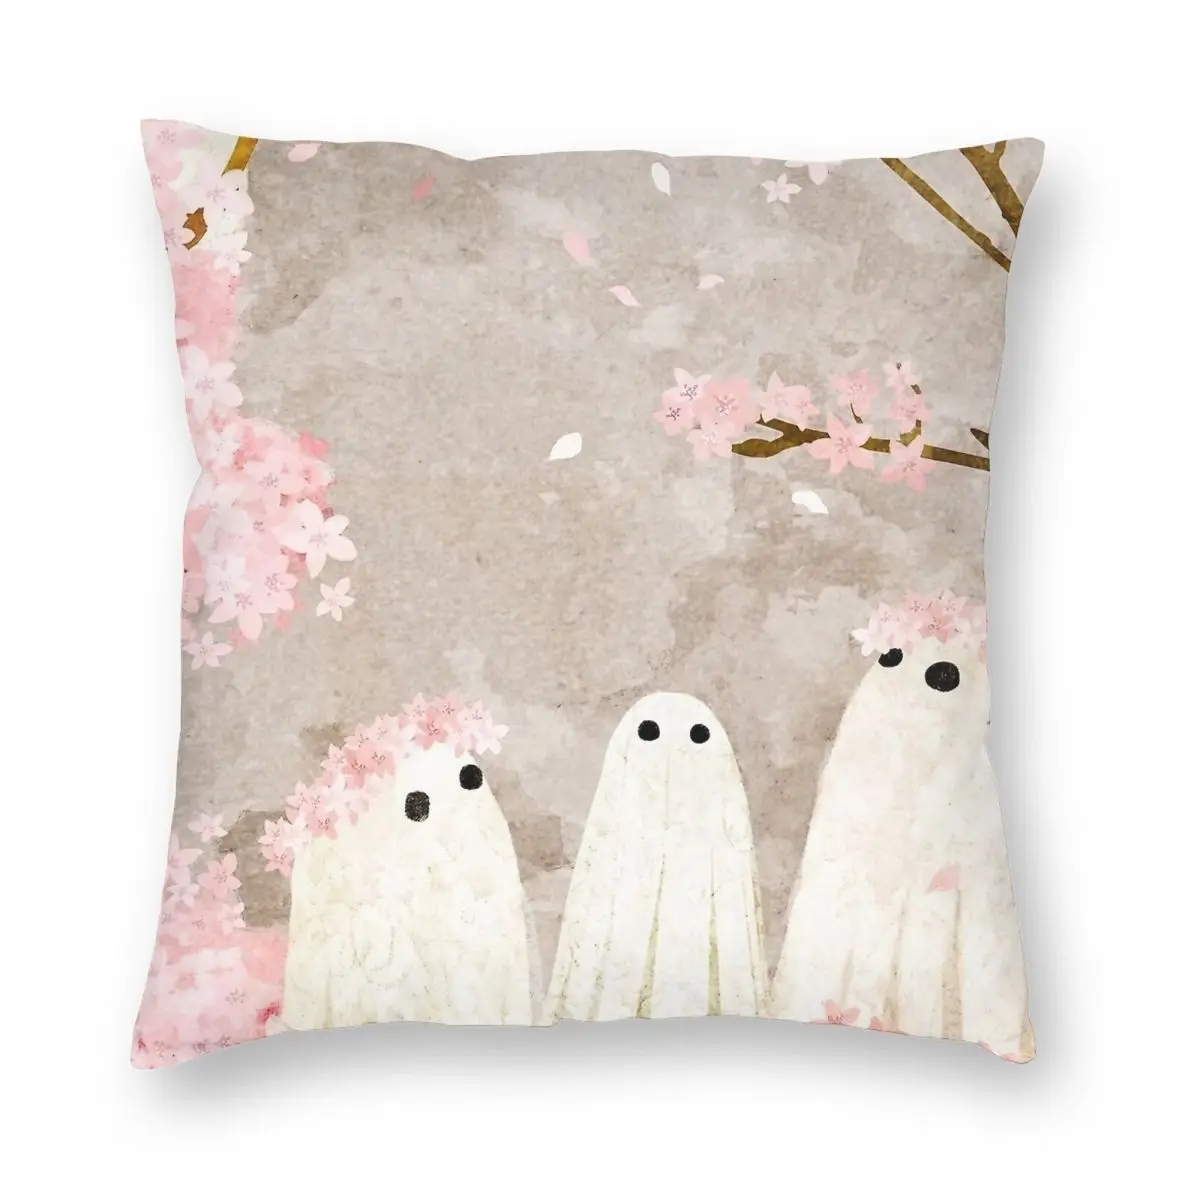 

Pink Flowers Ghost Halloween Pillowcase Printed Cushion Cover Decor Cherry Blossom Party Pillow Case Cover Home Square 40X40cm